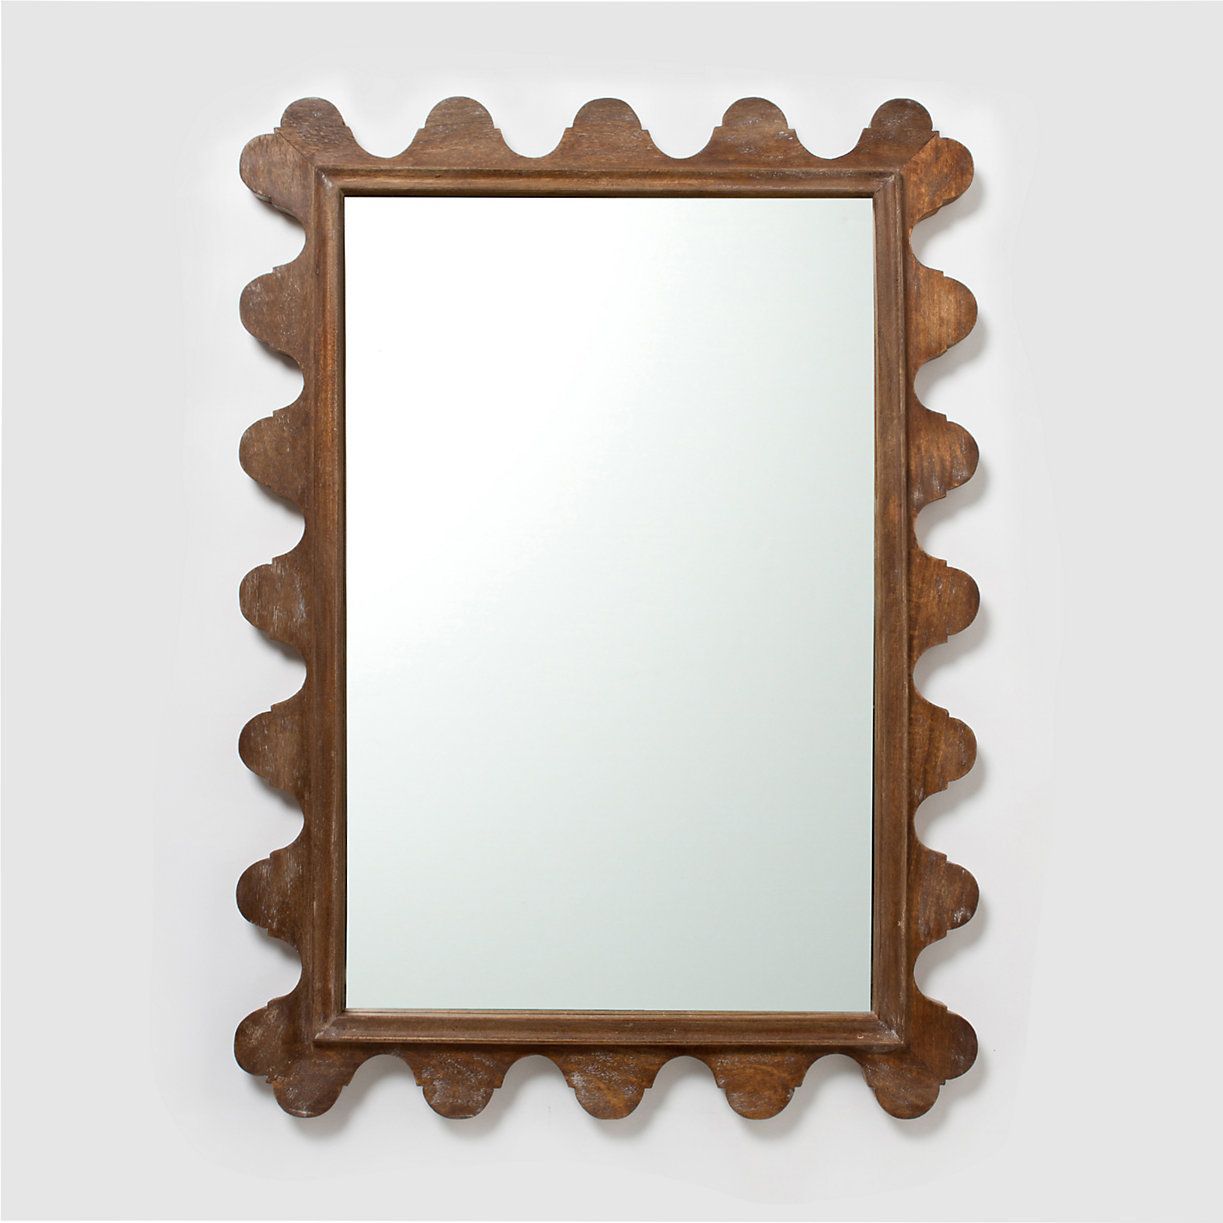 Scalloped Mirror At Terrain | Scalloped Mirror, Wood Framed Mirror Inside Gold Scalloped Wall Mirrors (View 9 of 15)